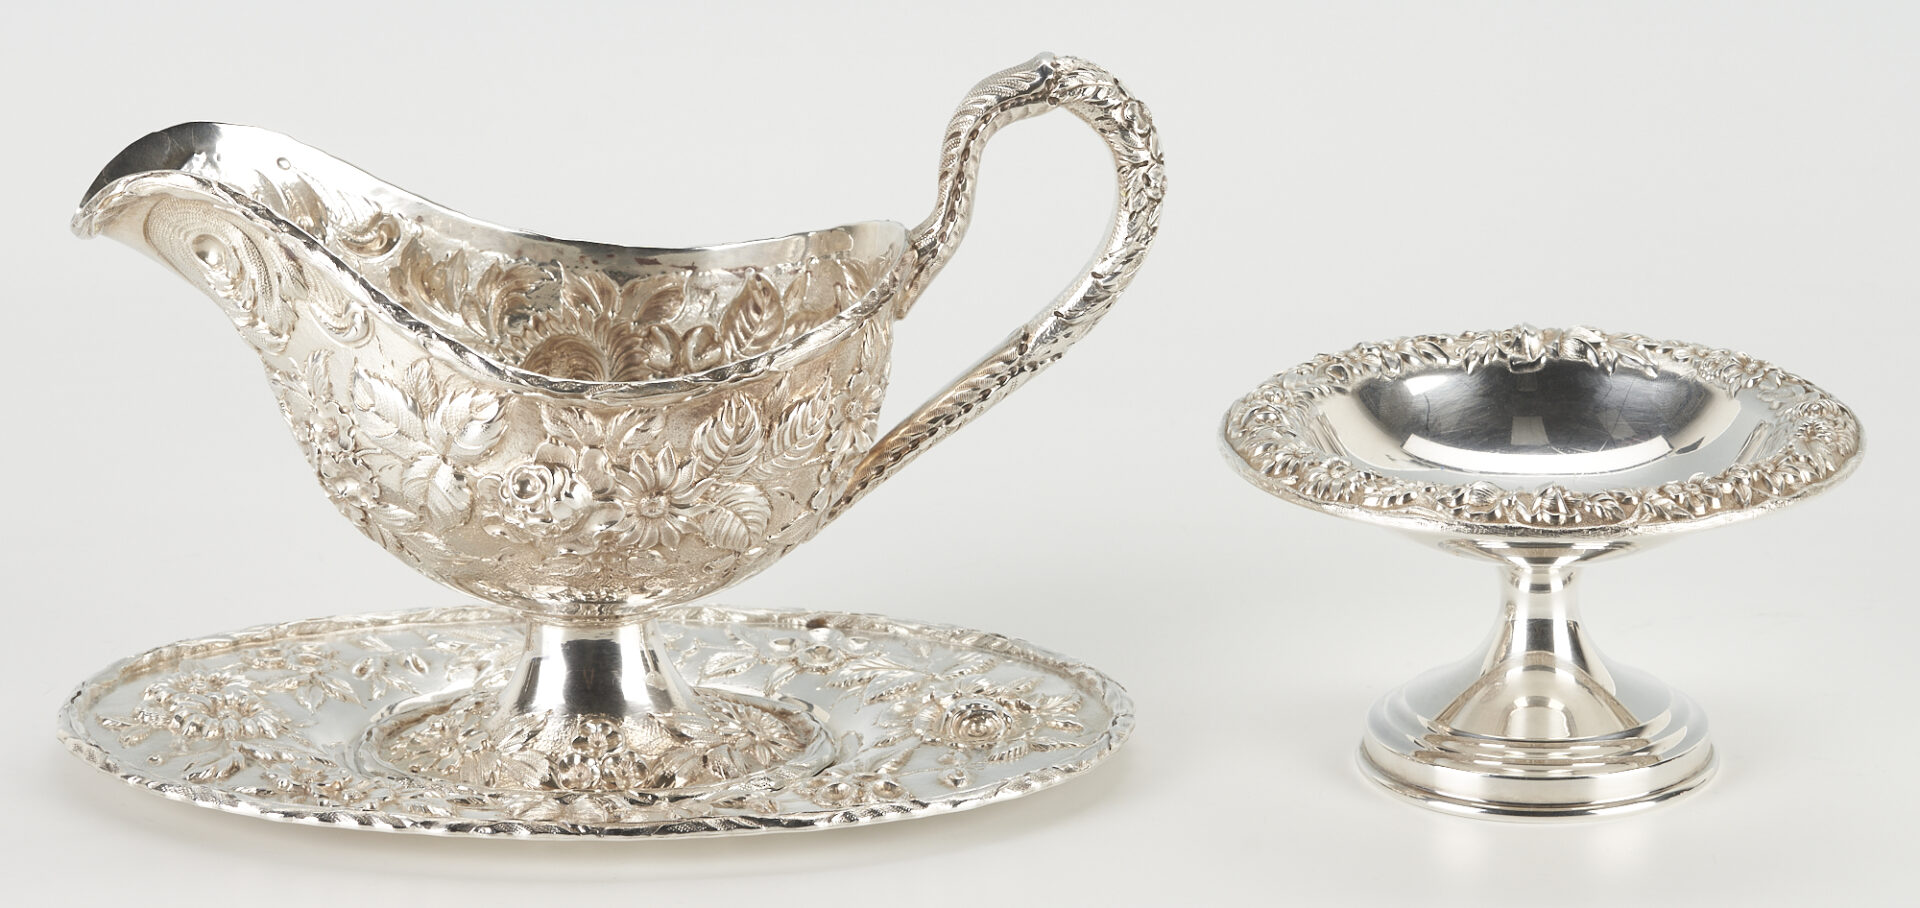 Lot 298: 9 Kirk Sterling Repousse Table Items incl. Gravy Boat, Hand Decorated